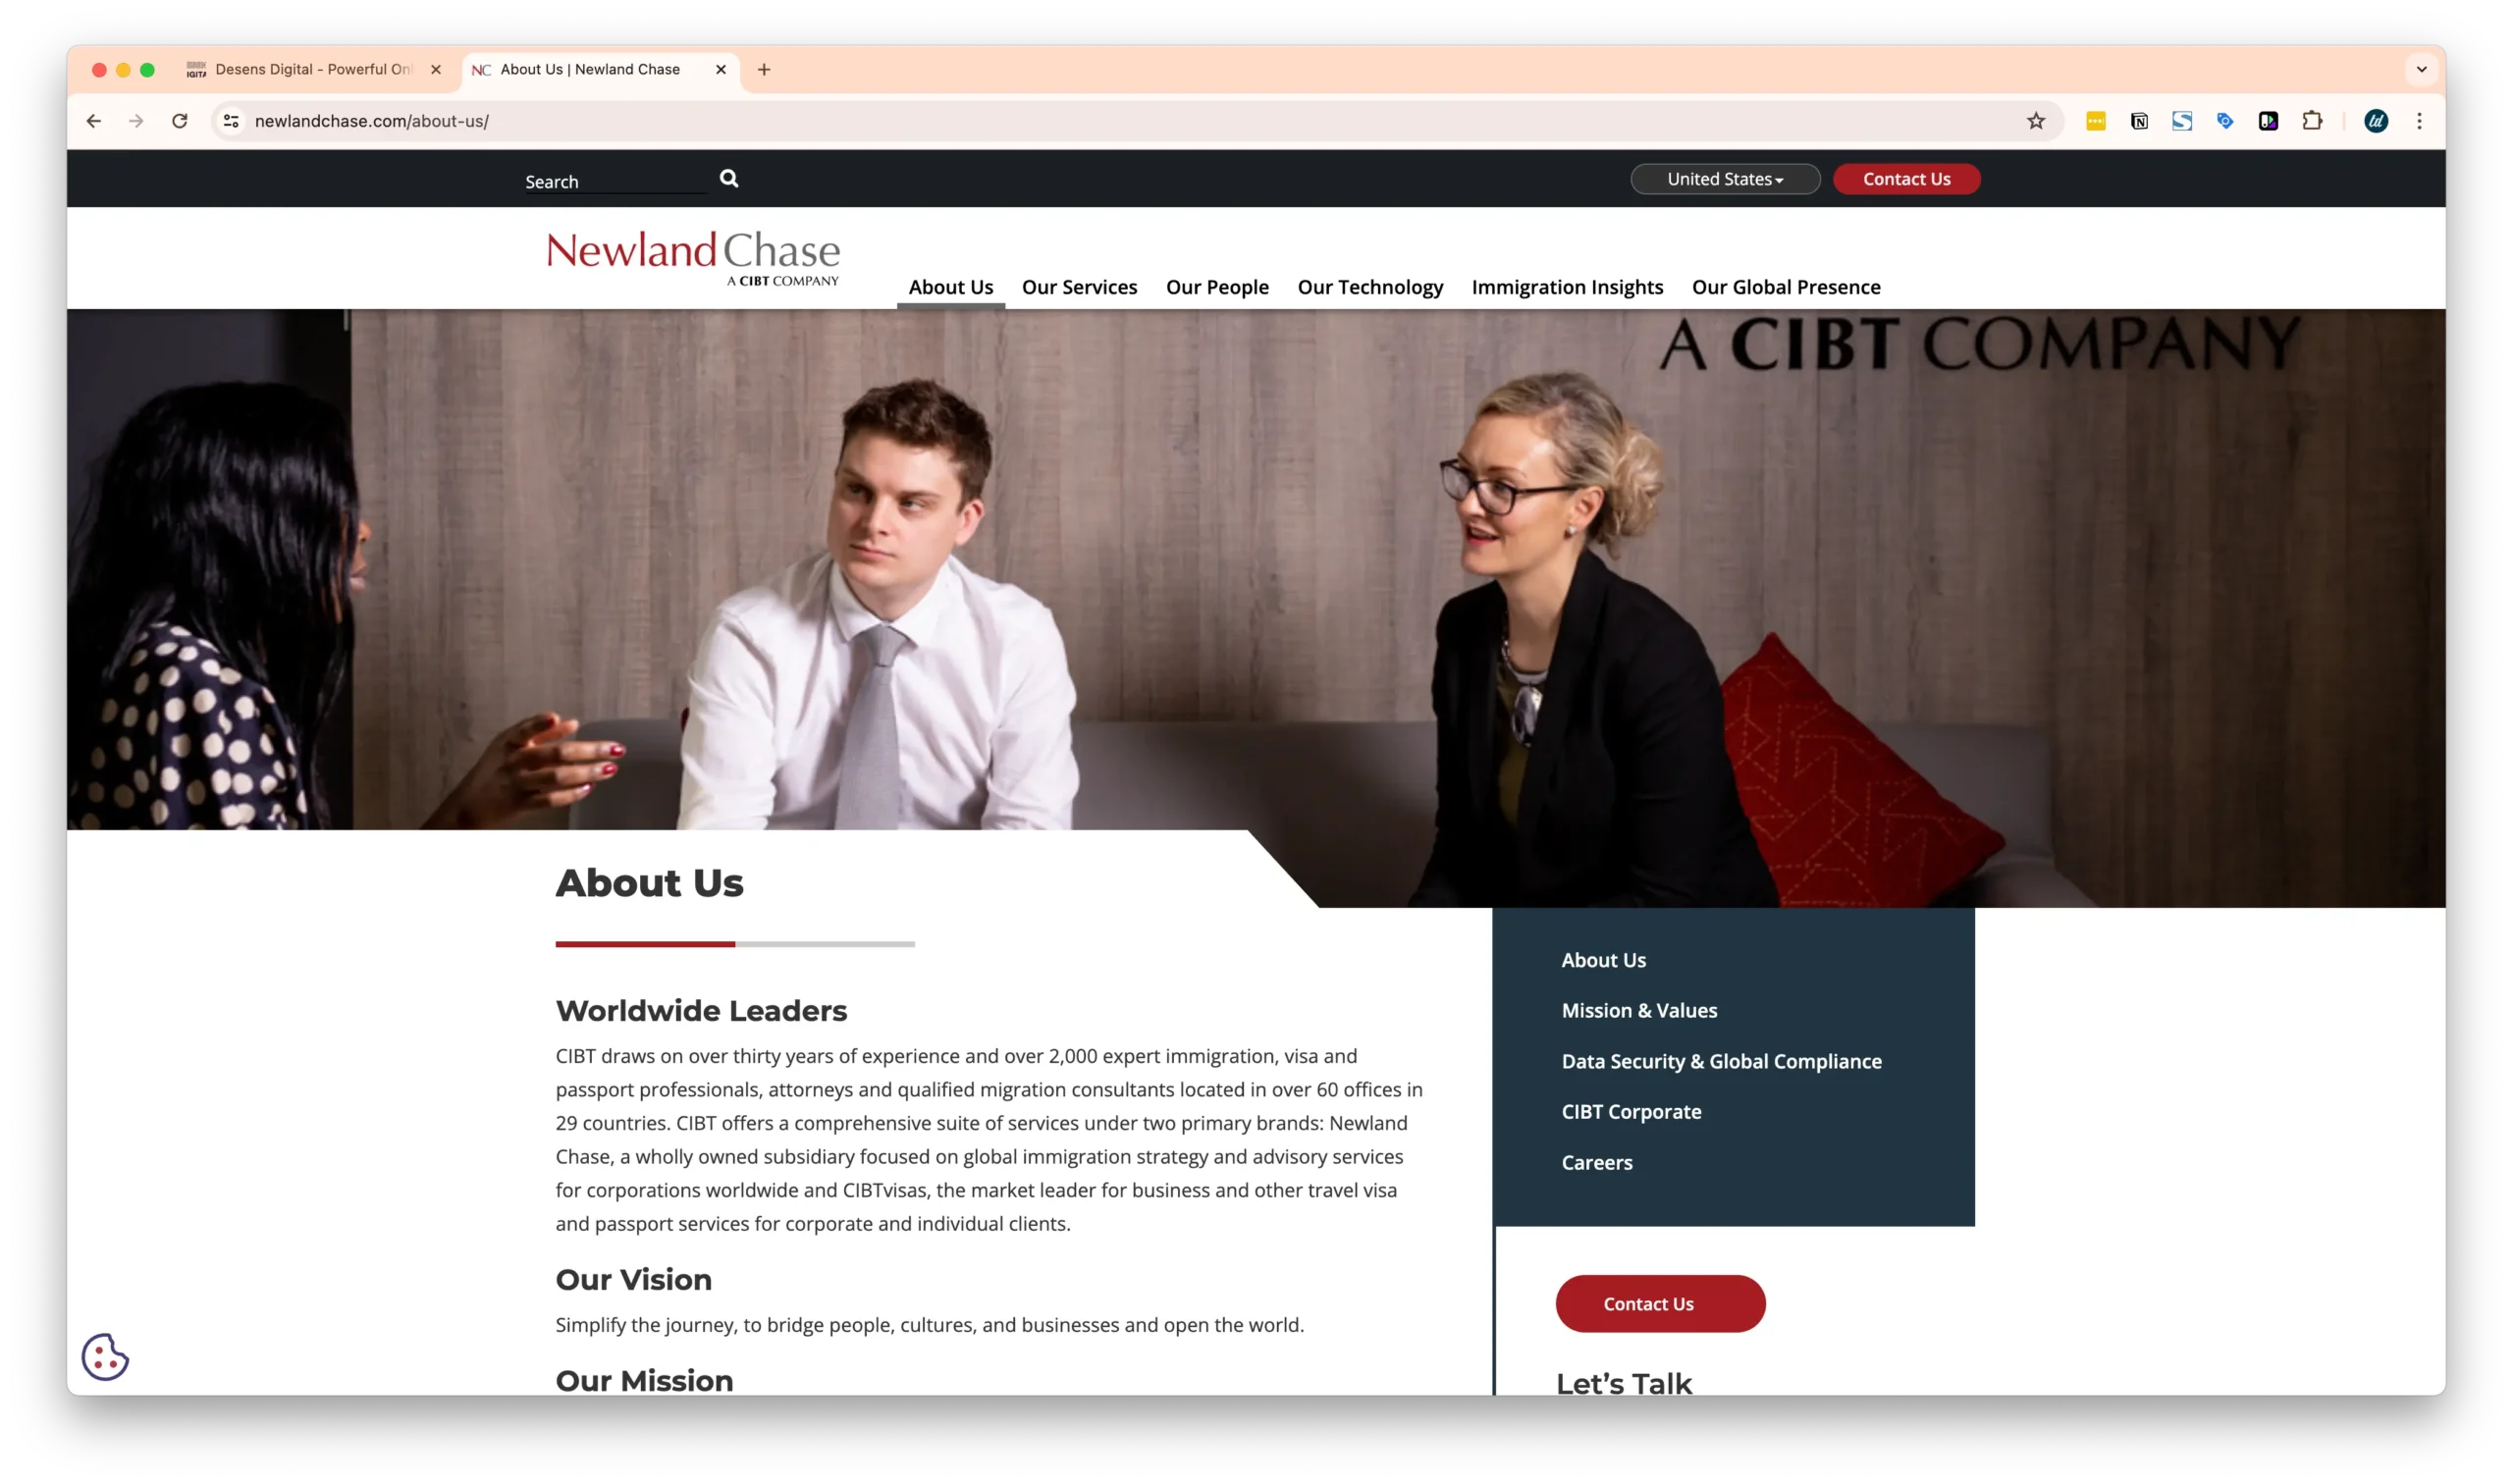 A webpage for Newland Chase, part of CIBT, detailing their global immigration services. It includes a photo of three professionals in a discussion and sections about their services, vision, mission, and values.